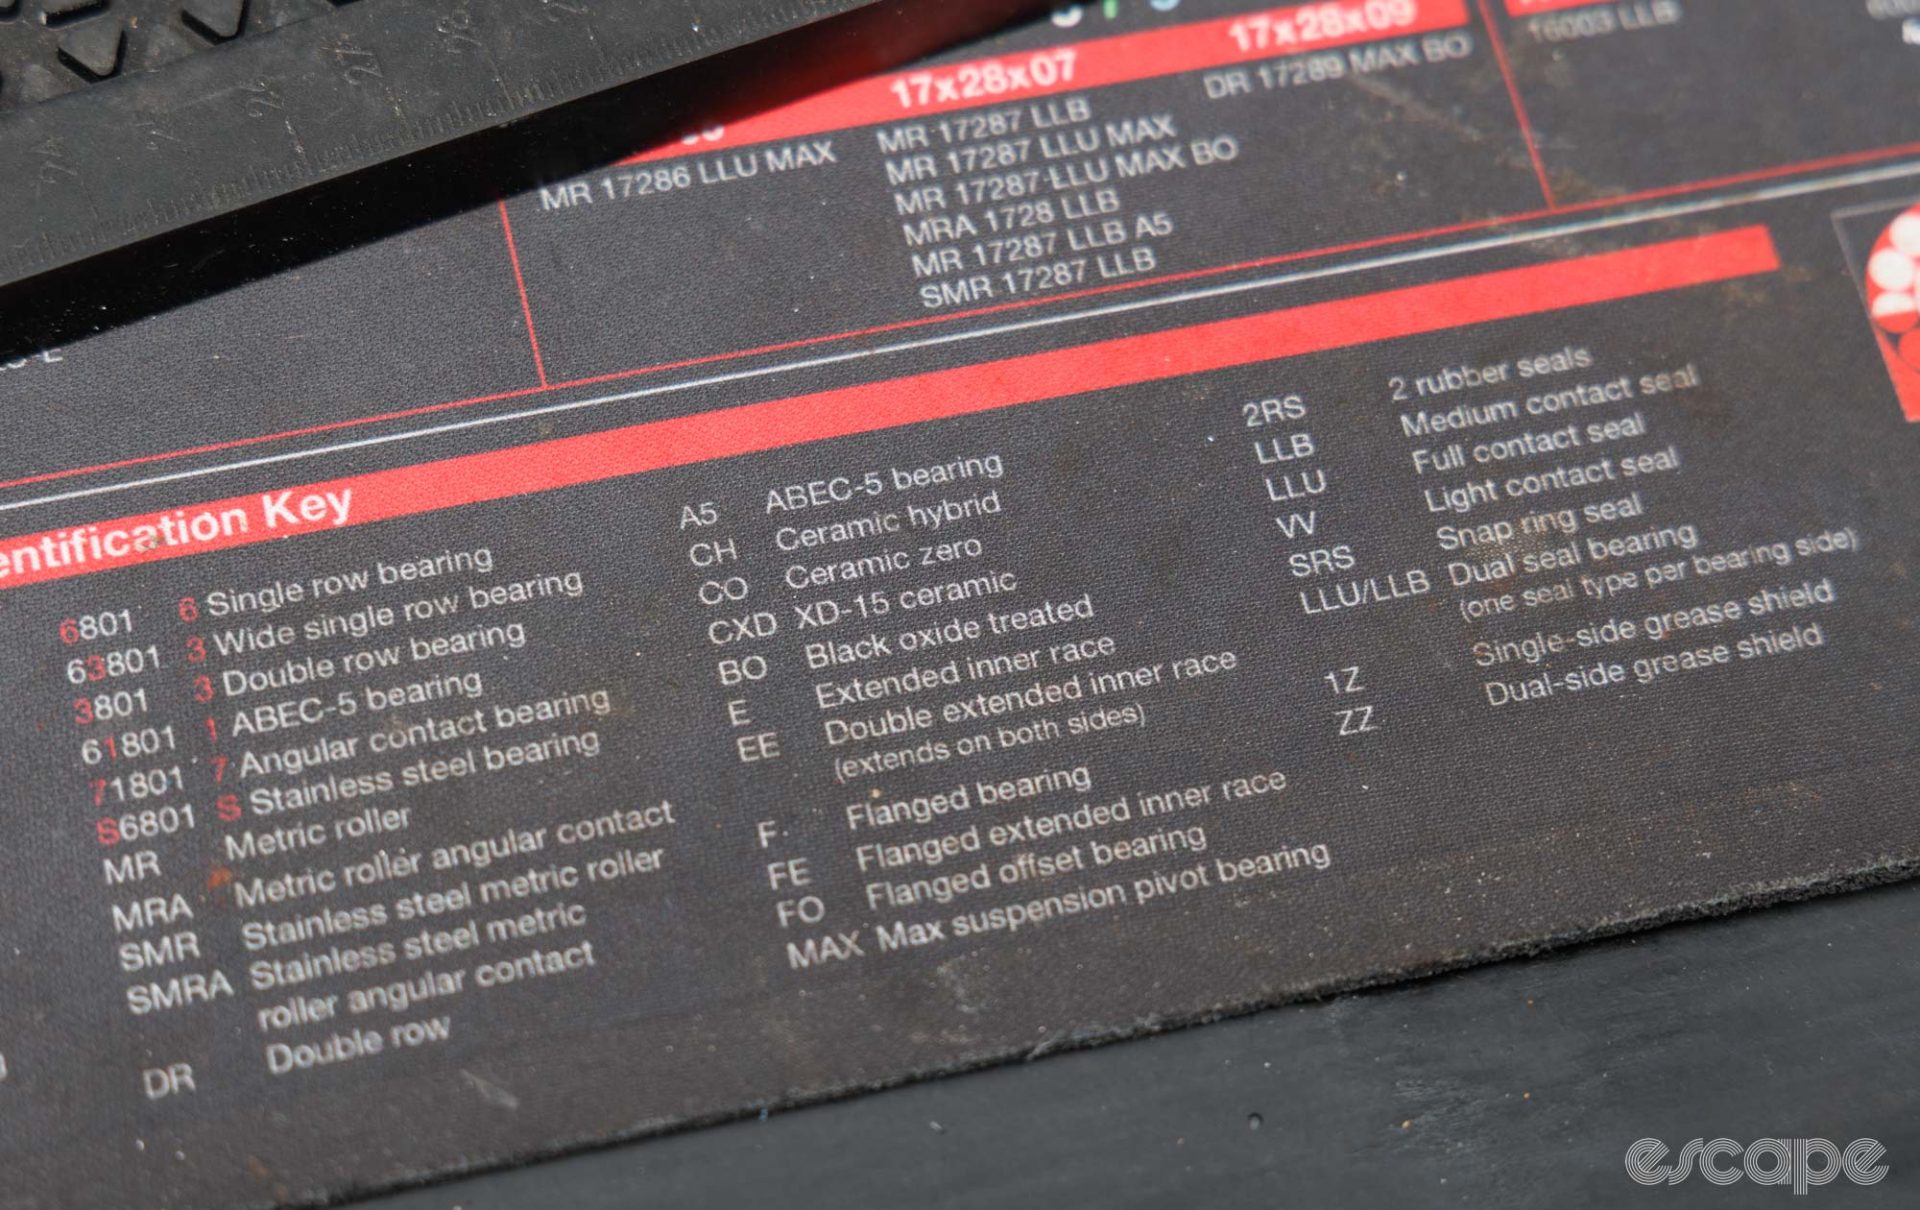 Another look at the Enduro benchtop mat. This time at the various bearing code definitions. 